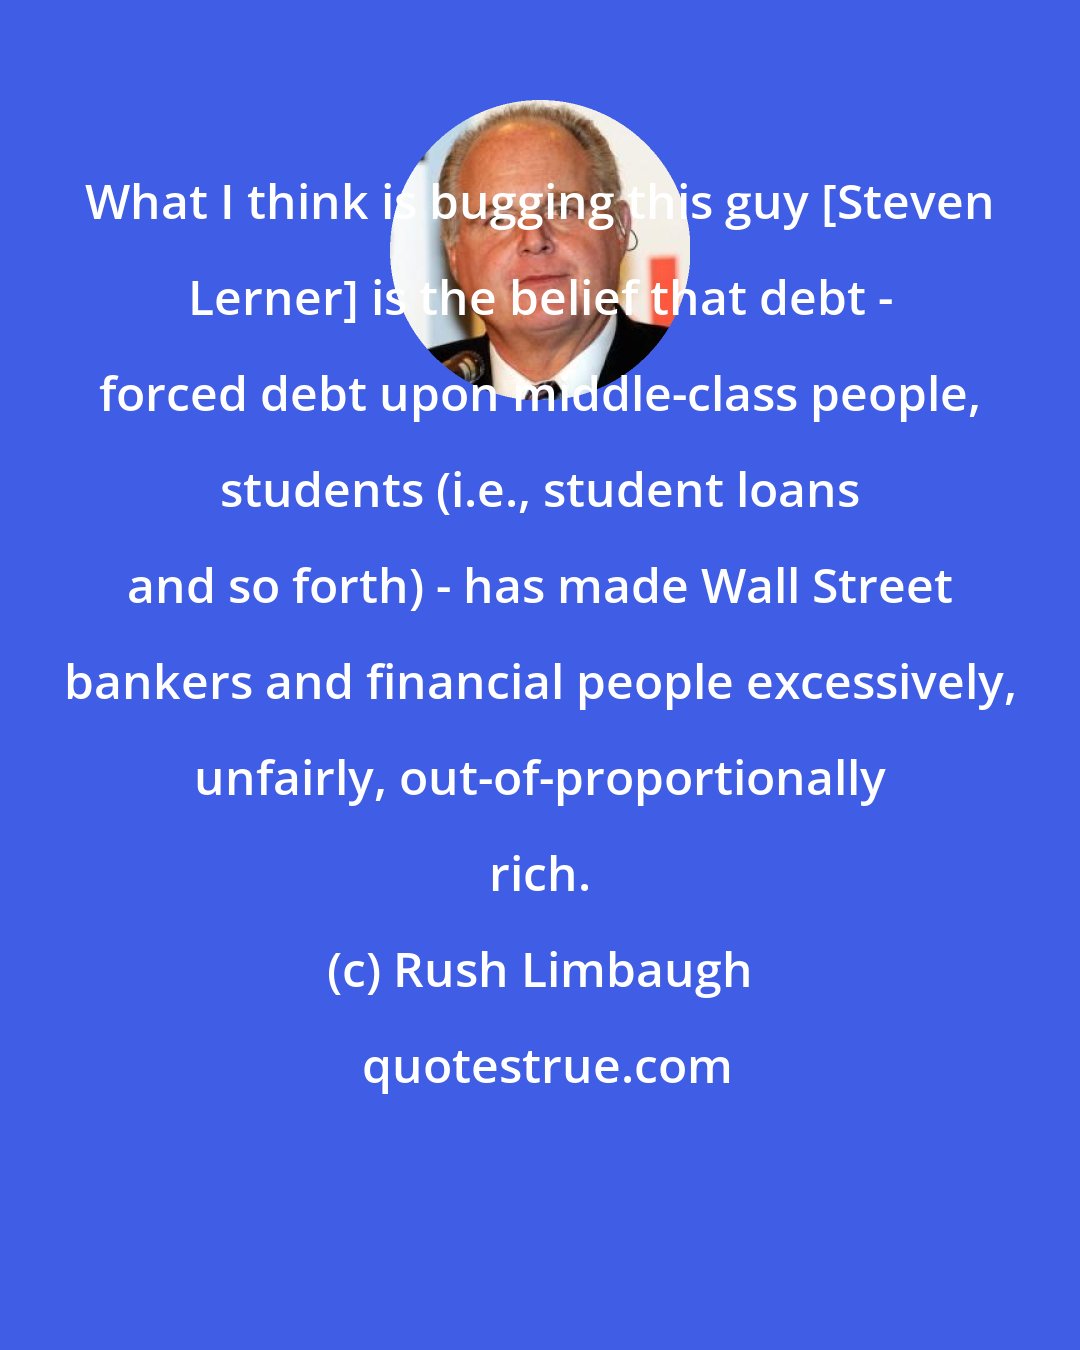 Rush Limbaugh: What I think is bugging this guy [Steven Lerner] is the belief that debt - forced debt upon middle-class people, students (i.e., student loans and so forth) - has made Wall Street bankers and financial people excessively, unfairly, out-of-proportionally rich.